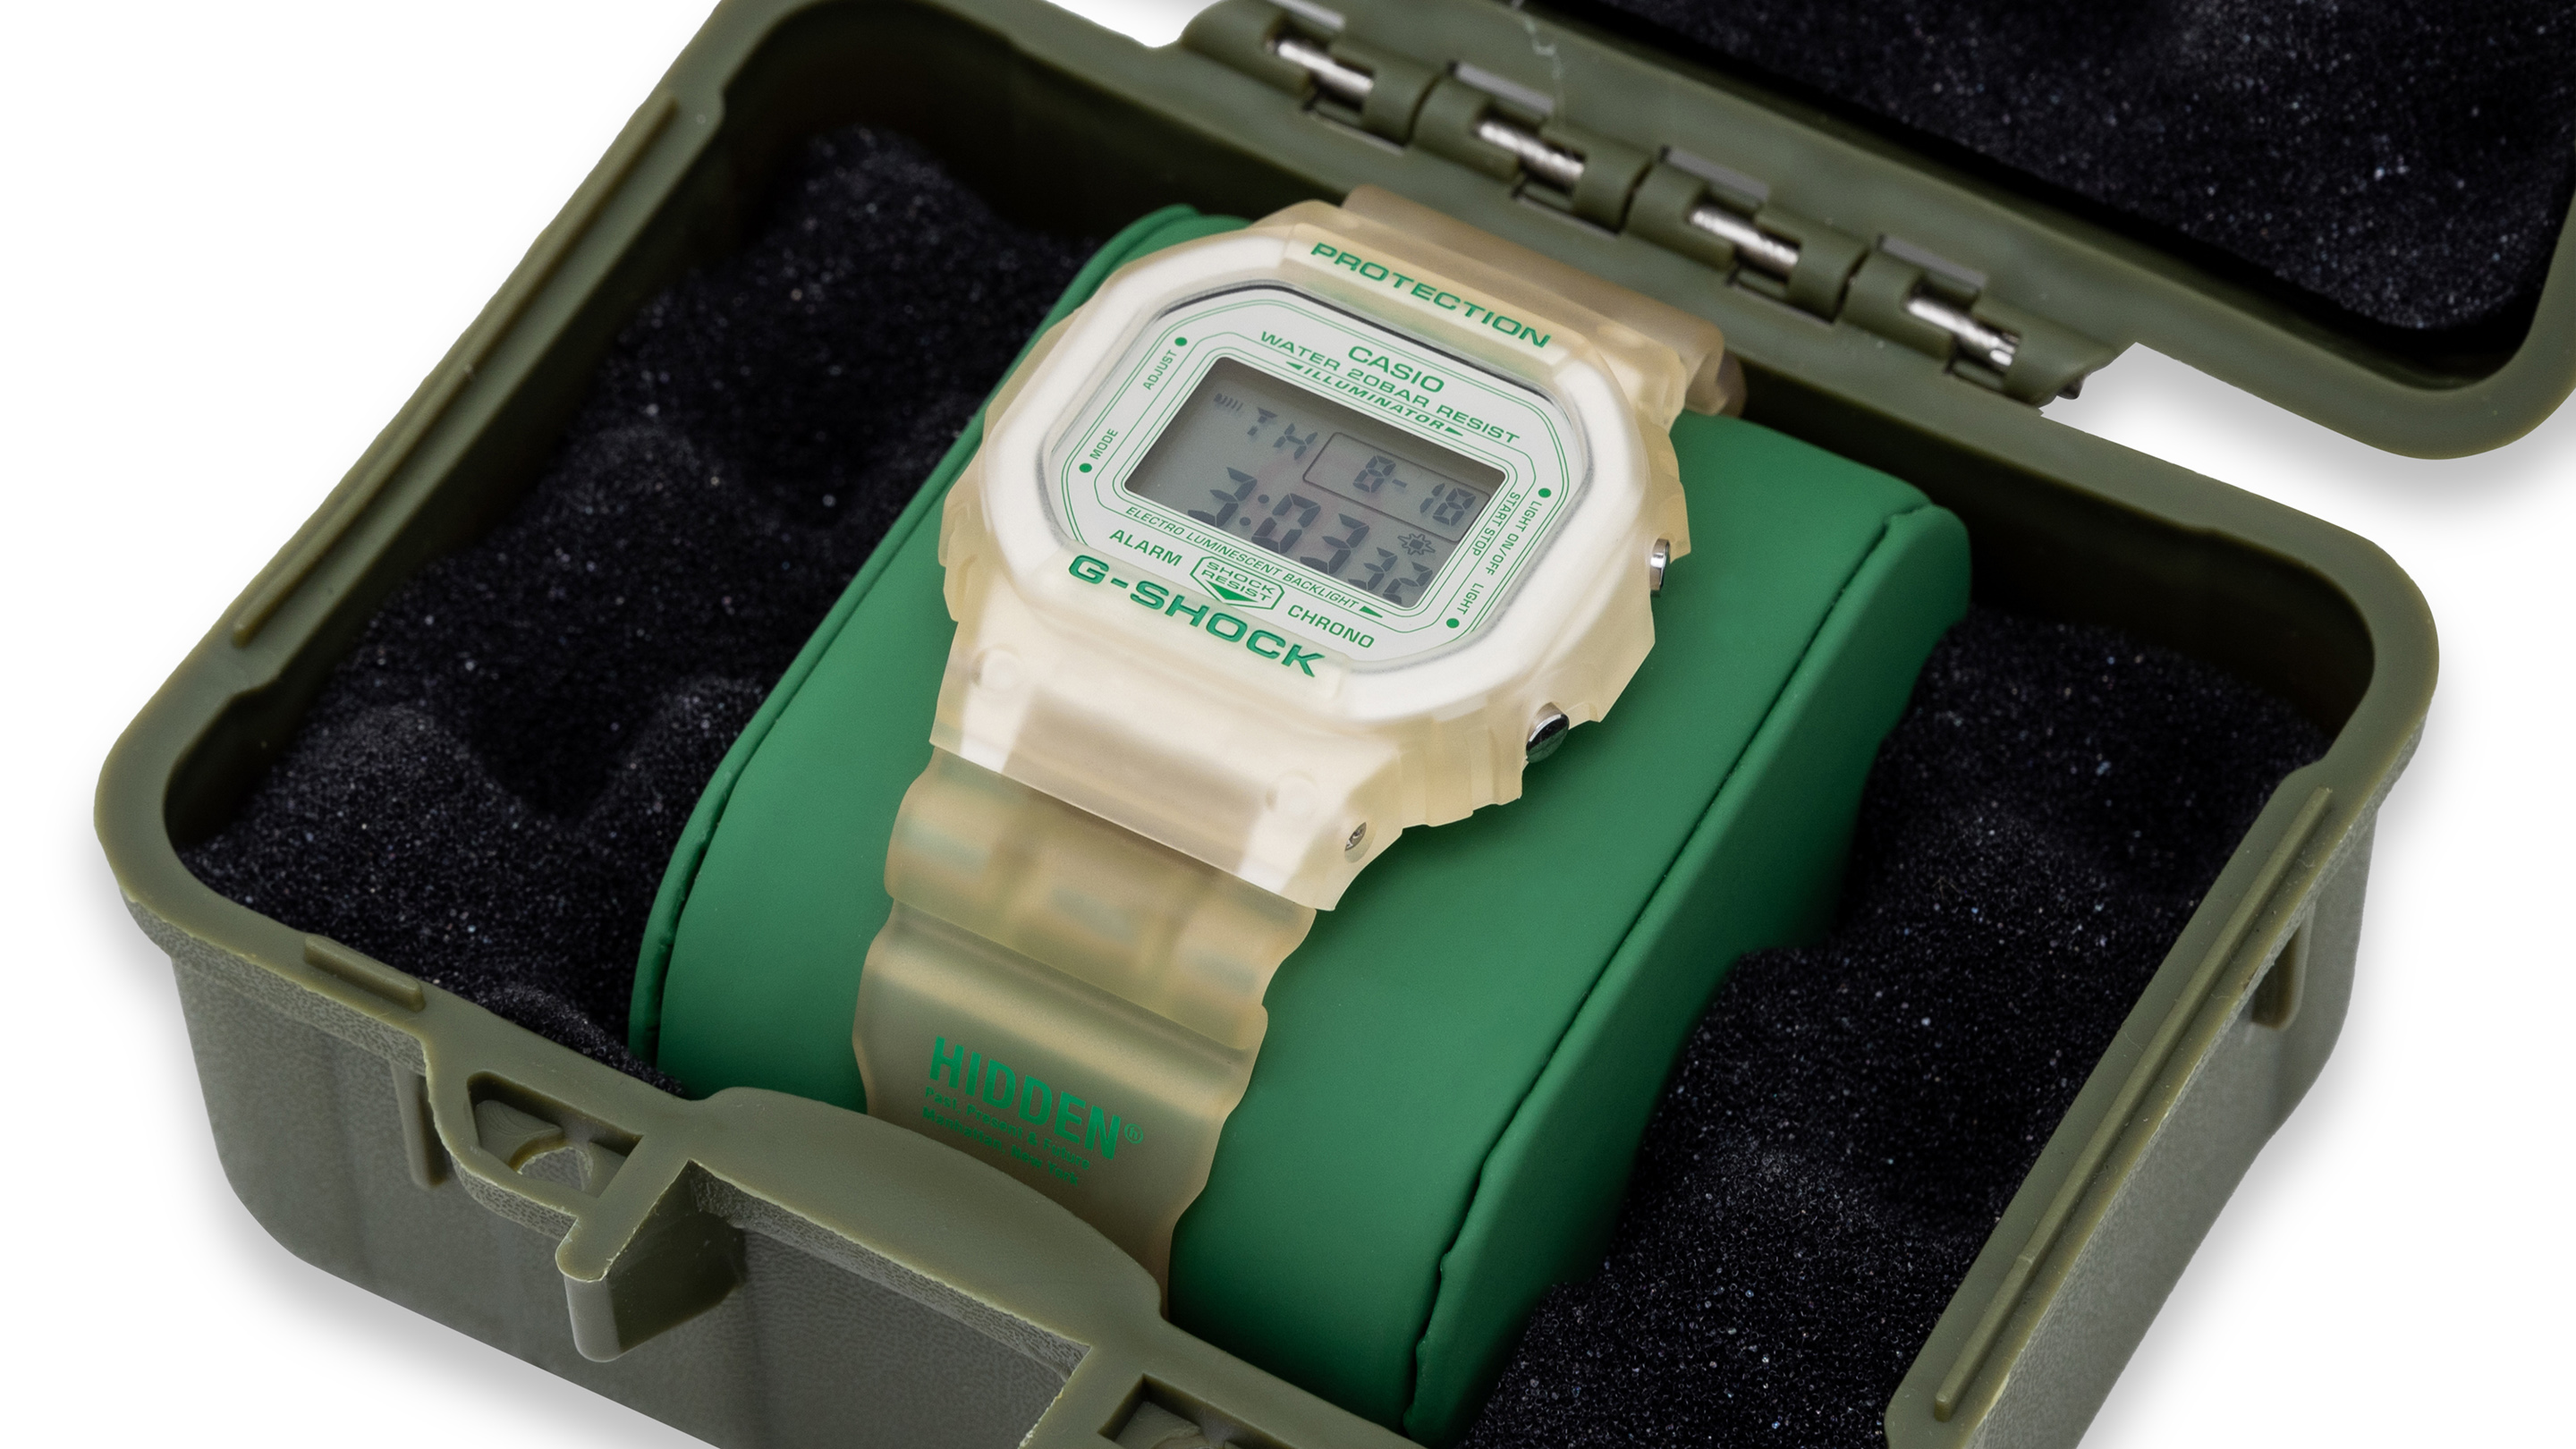 The HIDDEN NY x G-Shock Limited Edition